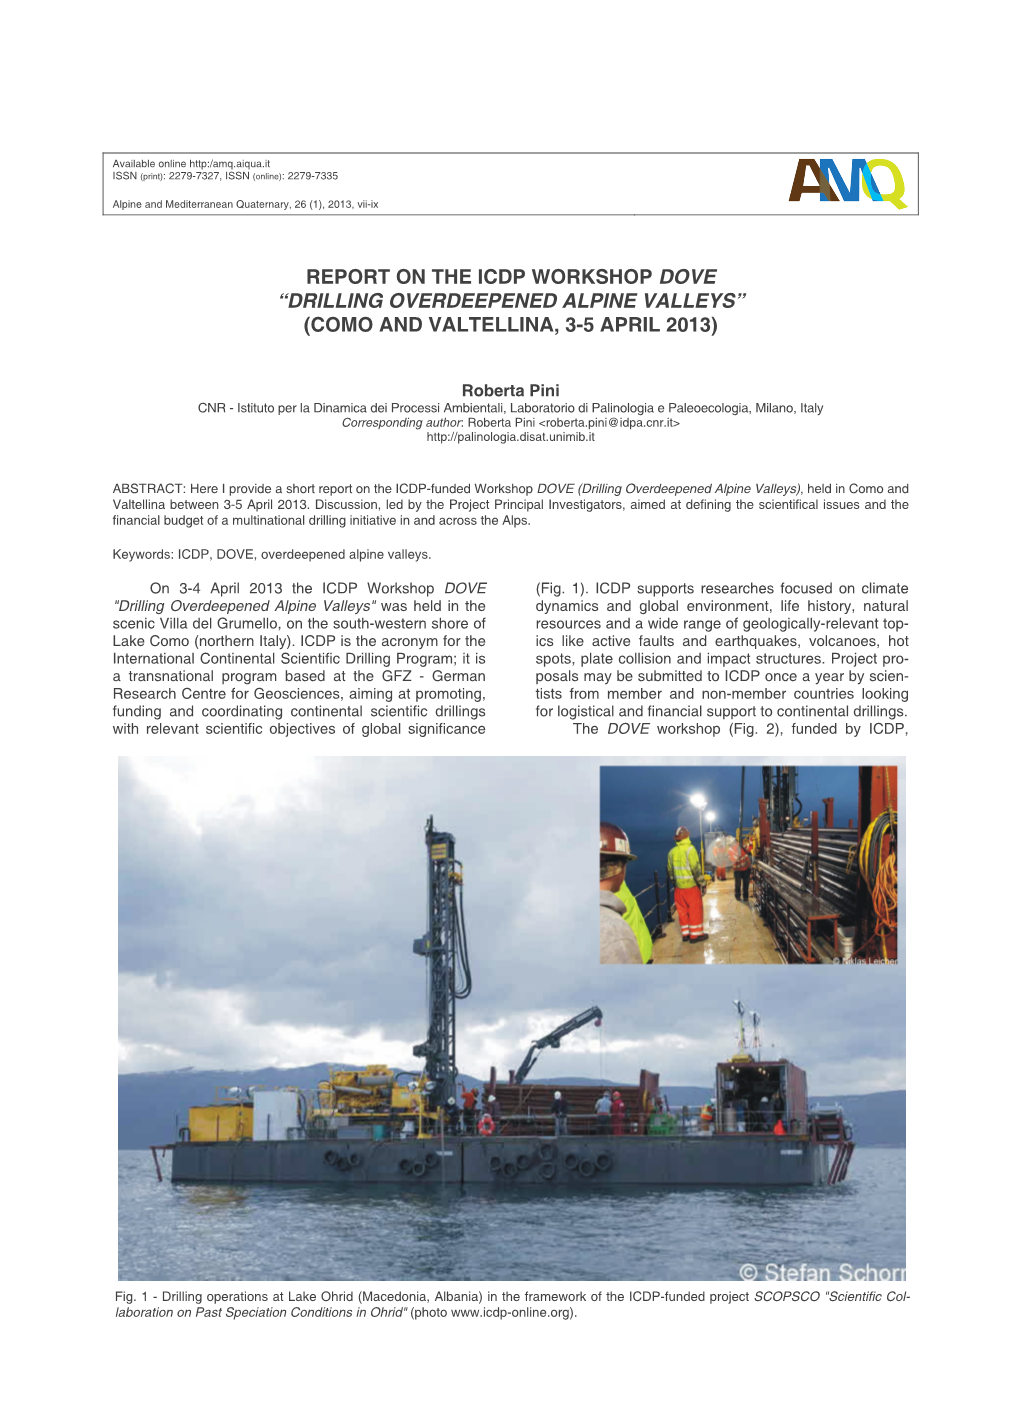 Report on the Icdp Workshop Dove “Drilling Overdeepened Alpine Valleys” (Como and Valtellina, 3-5 April 2013)